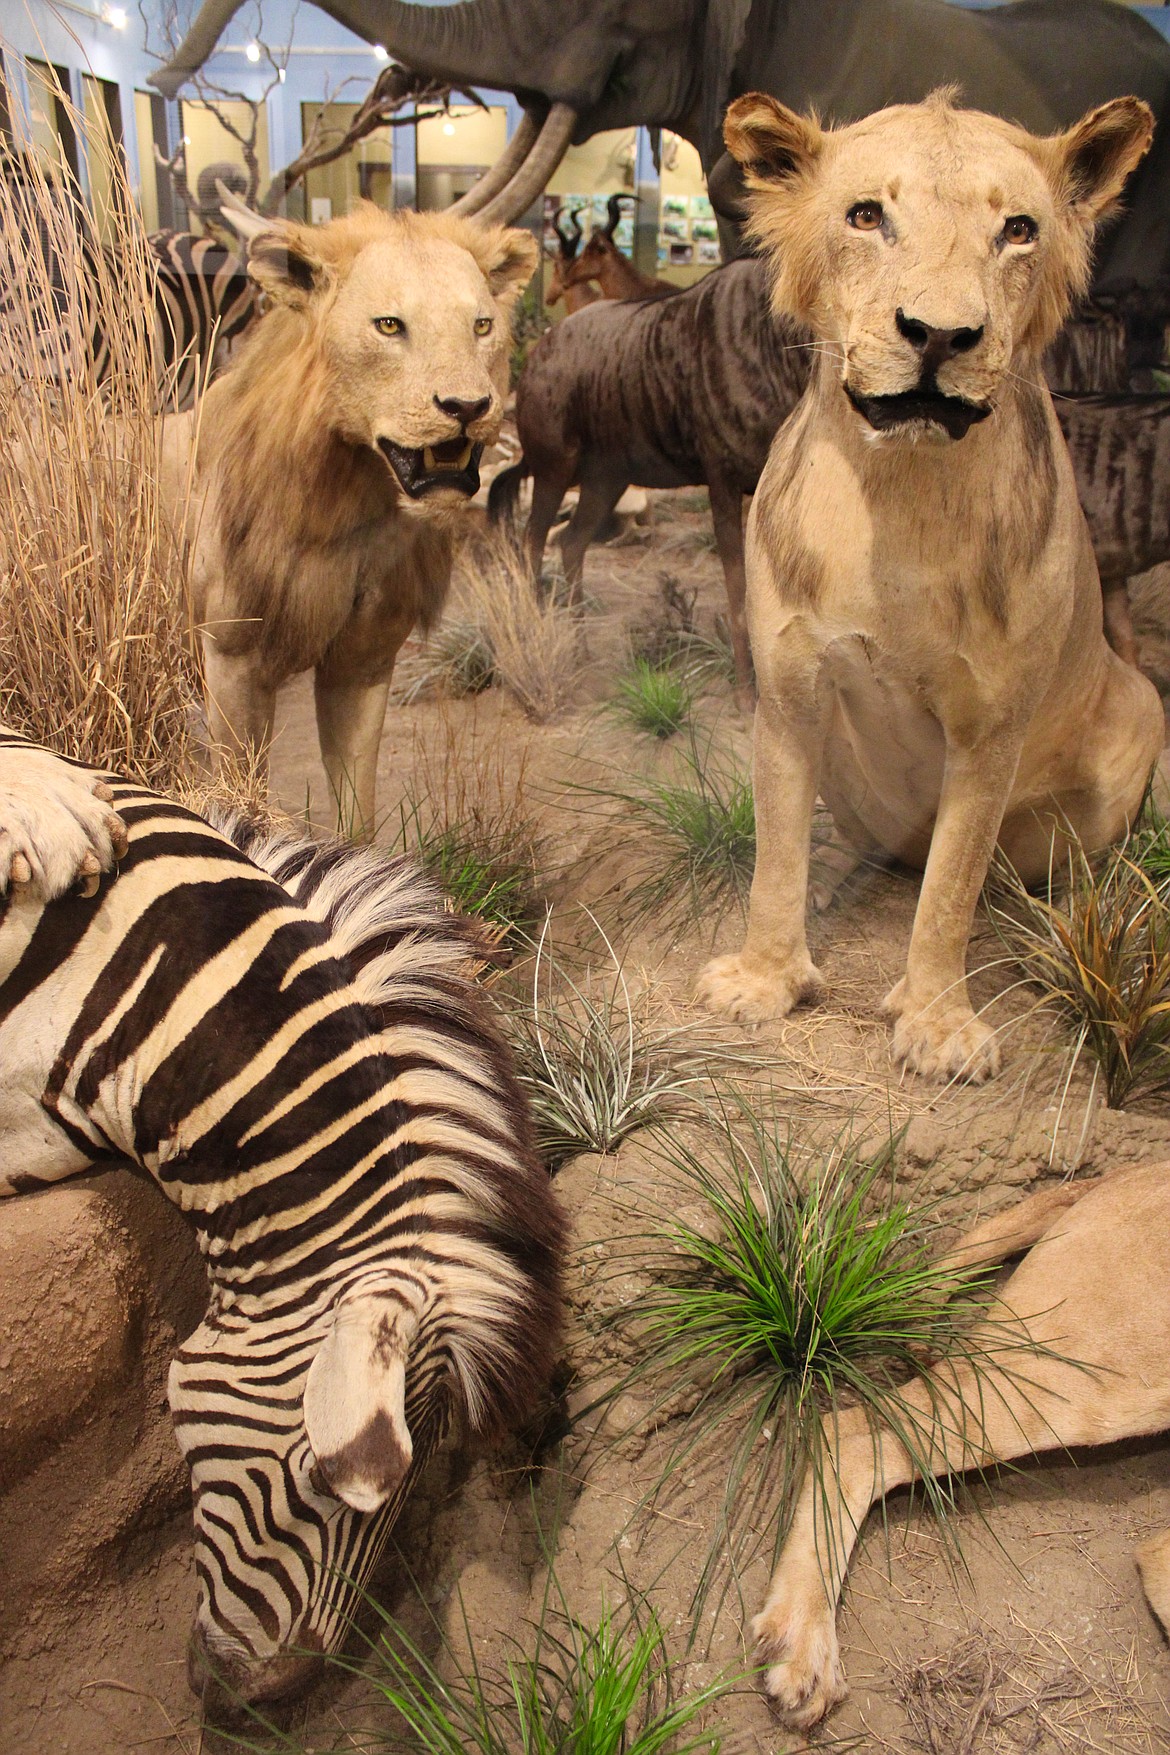 Lions hover over a zebra in the Africa exhibit at Lasting Legacy Wildlife Museum in Ritzville.